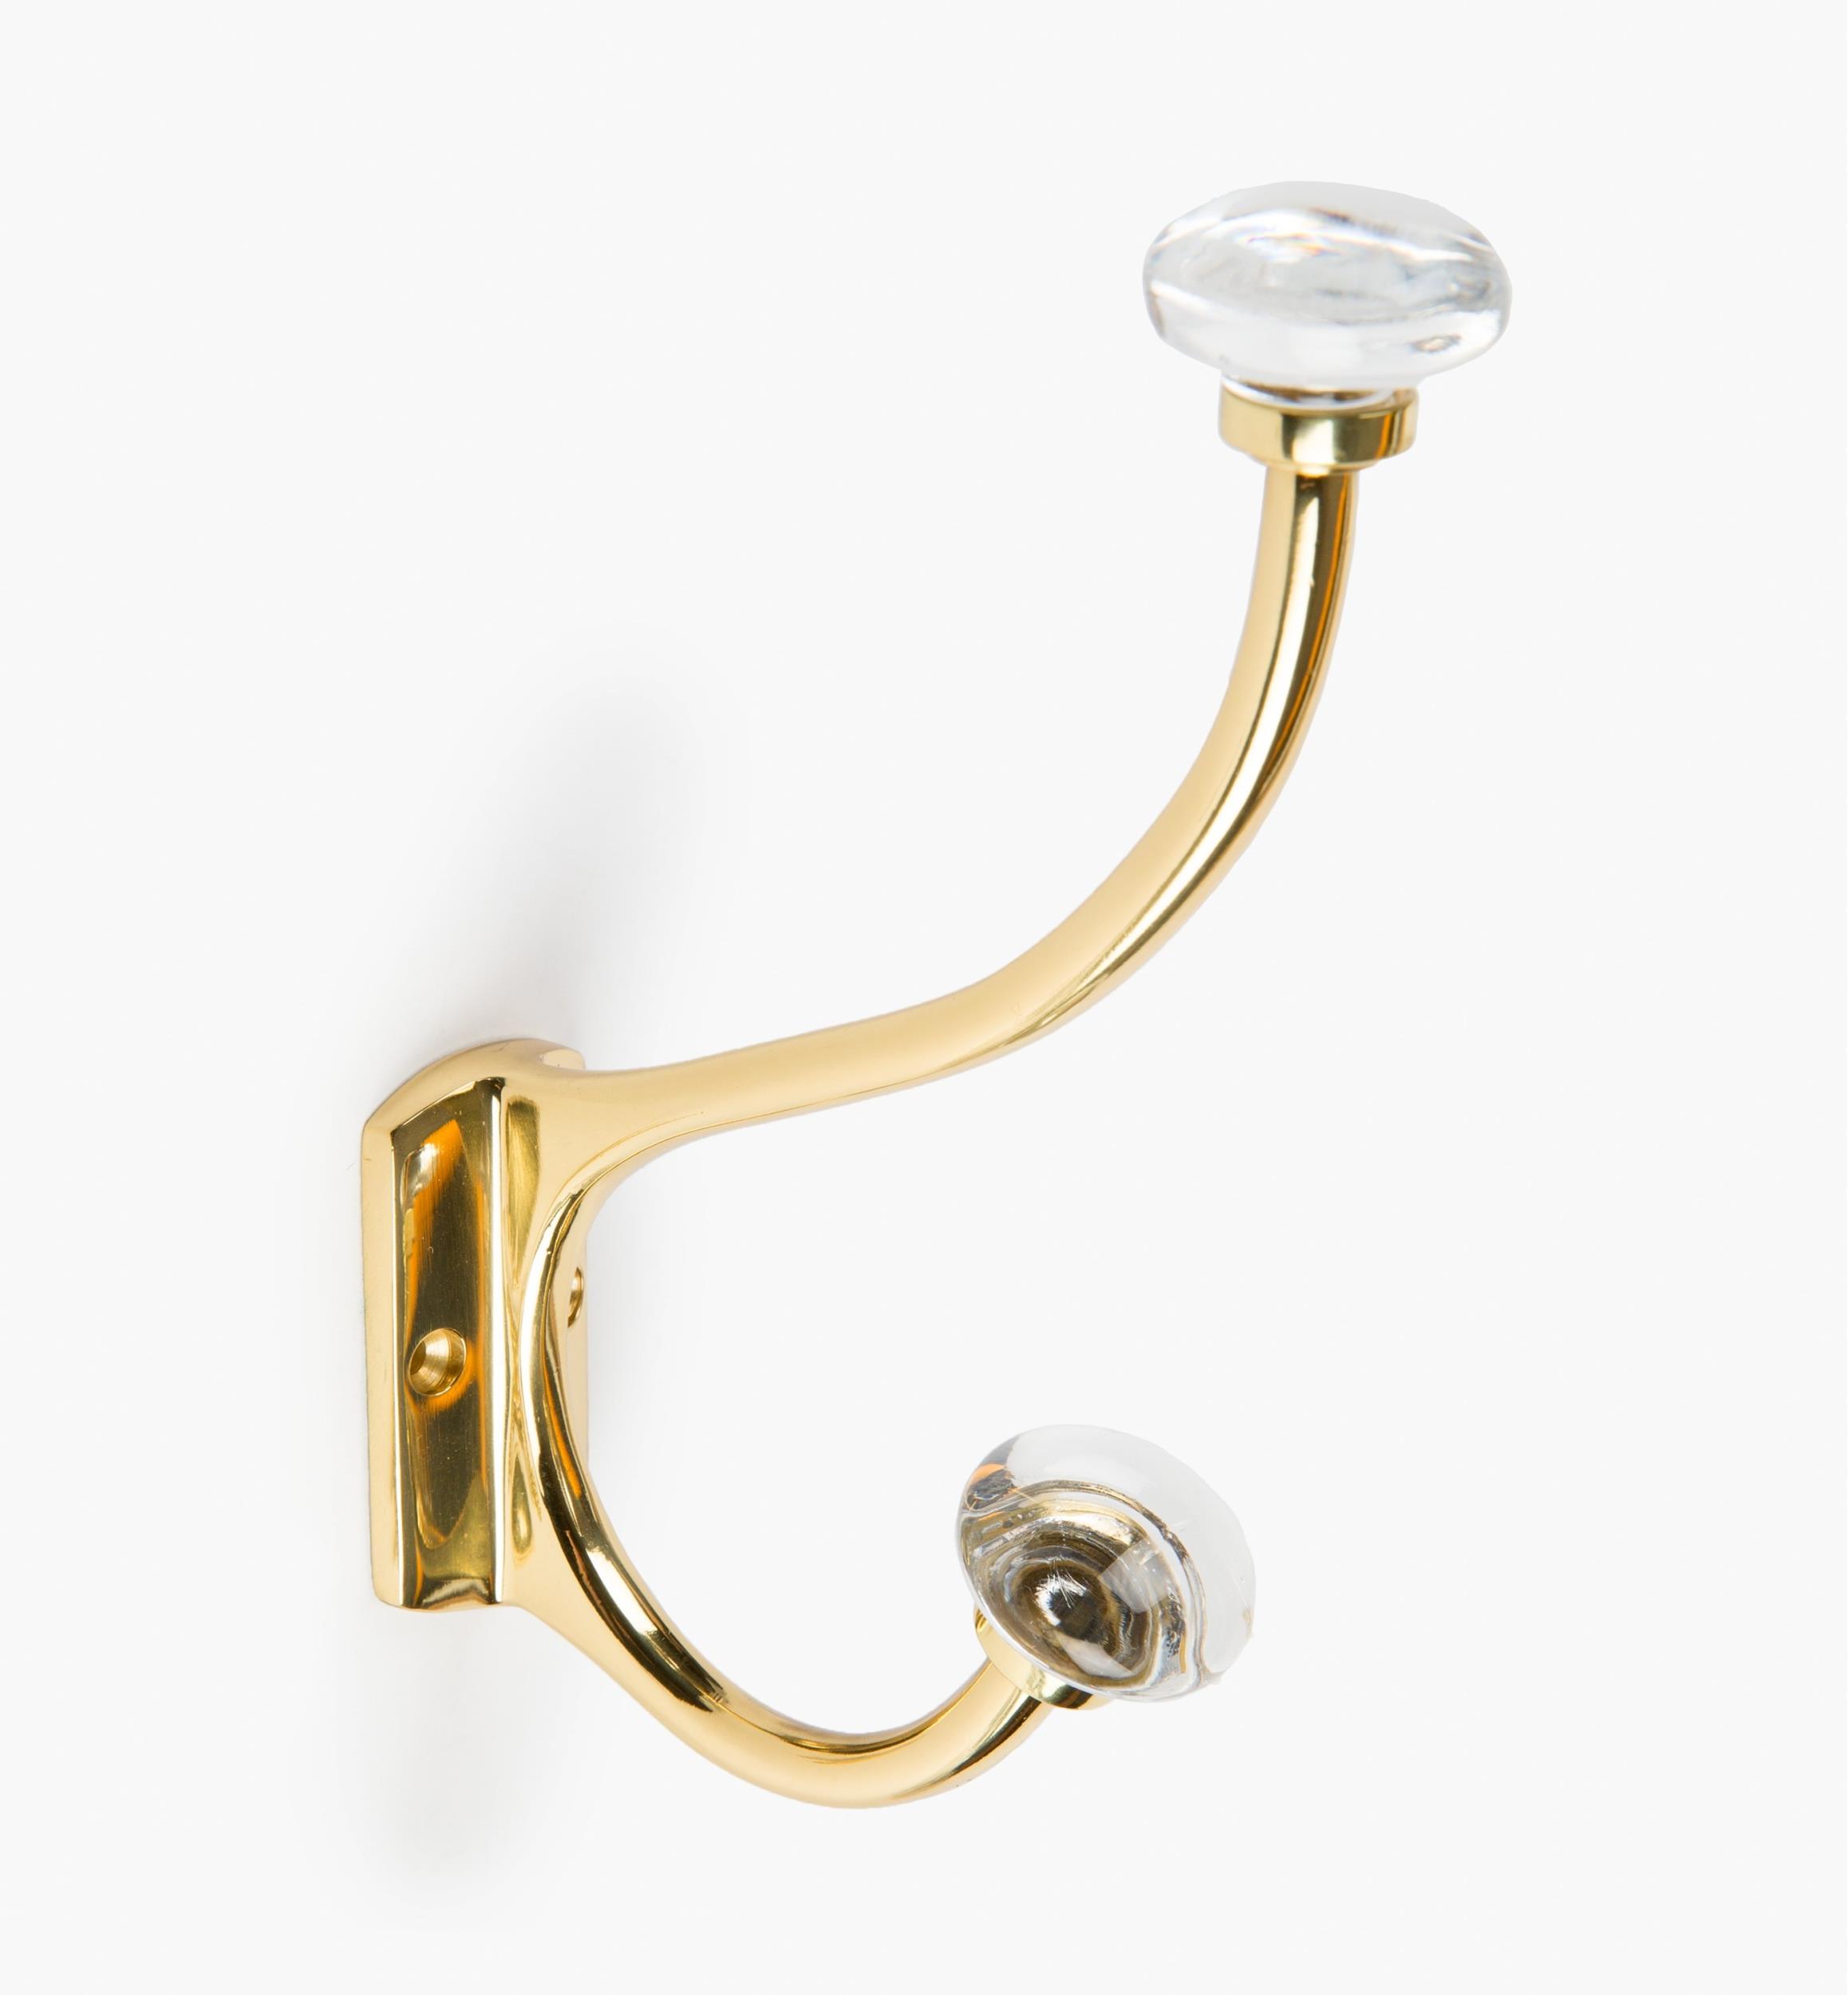 Brass Coat Hook with Crystal Knobs - Lee Valley Tools